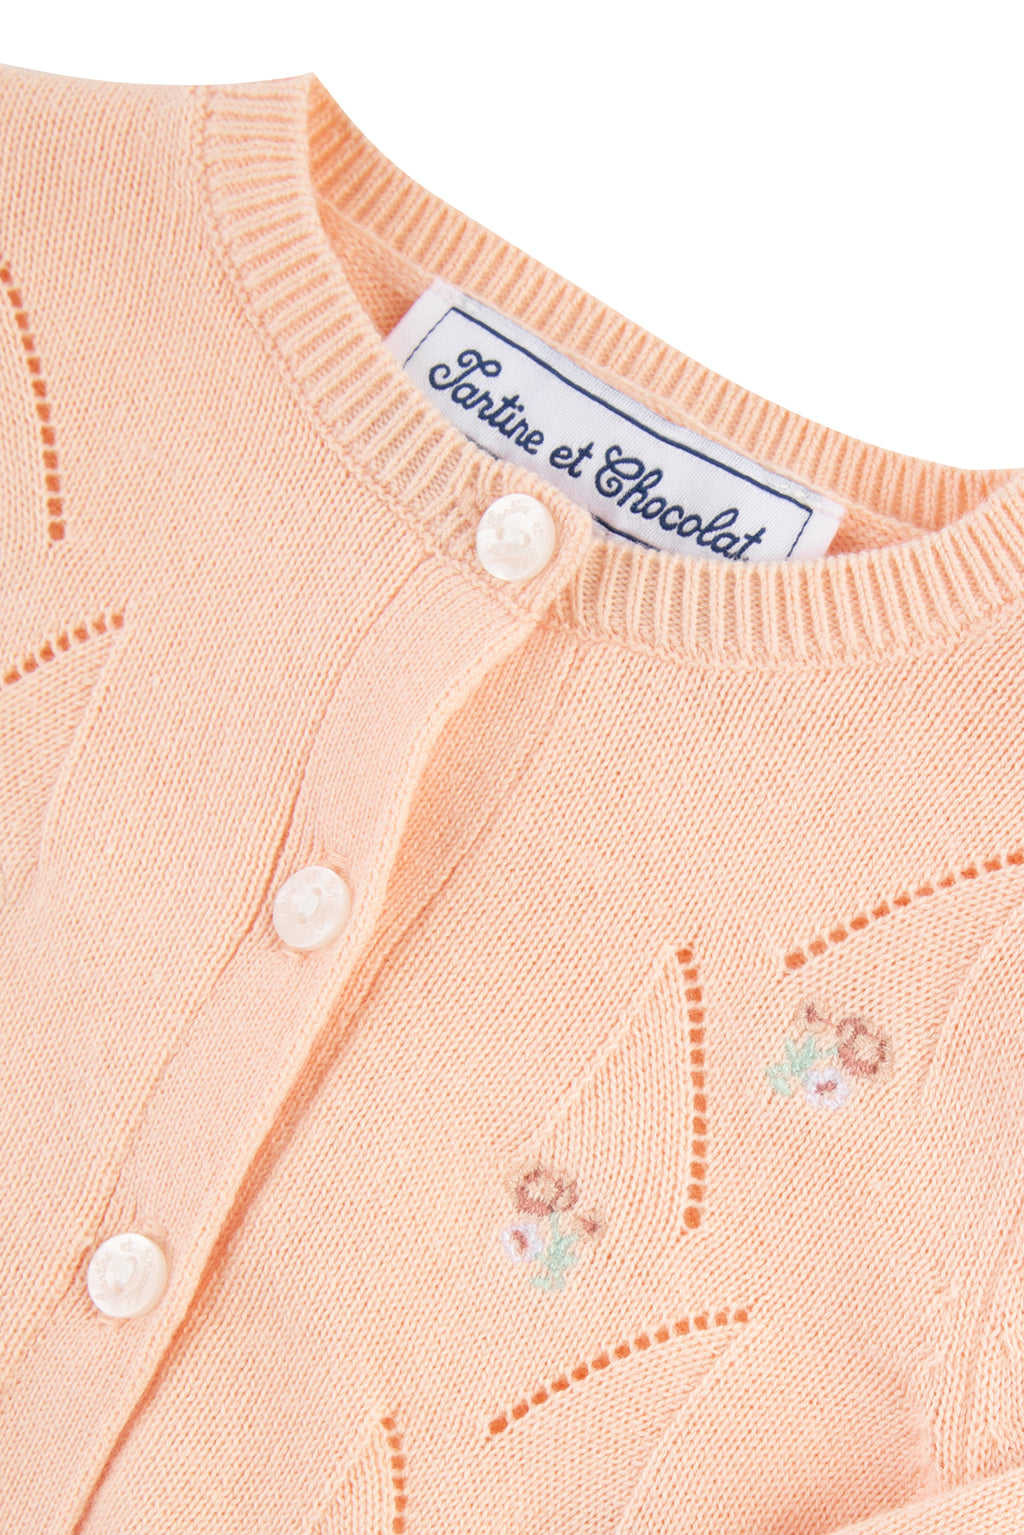 Cardigan - Peach Embrodery all over